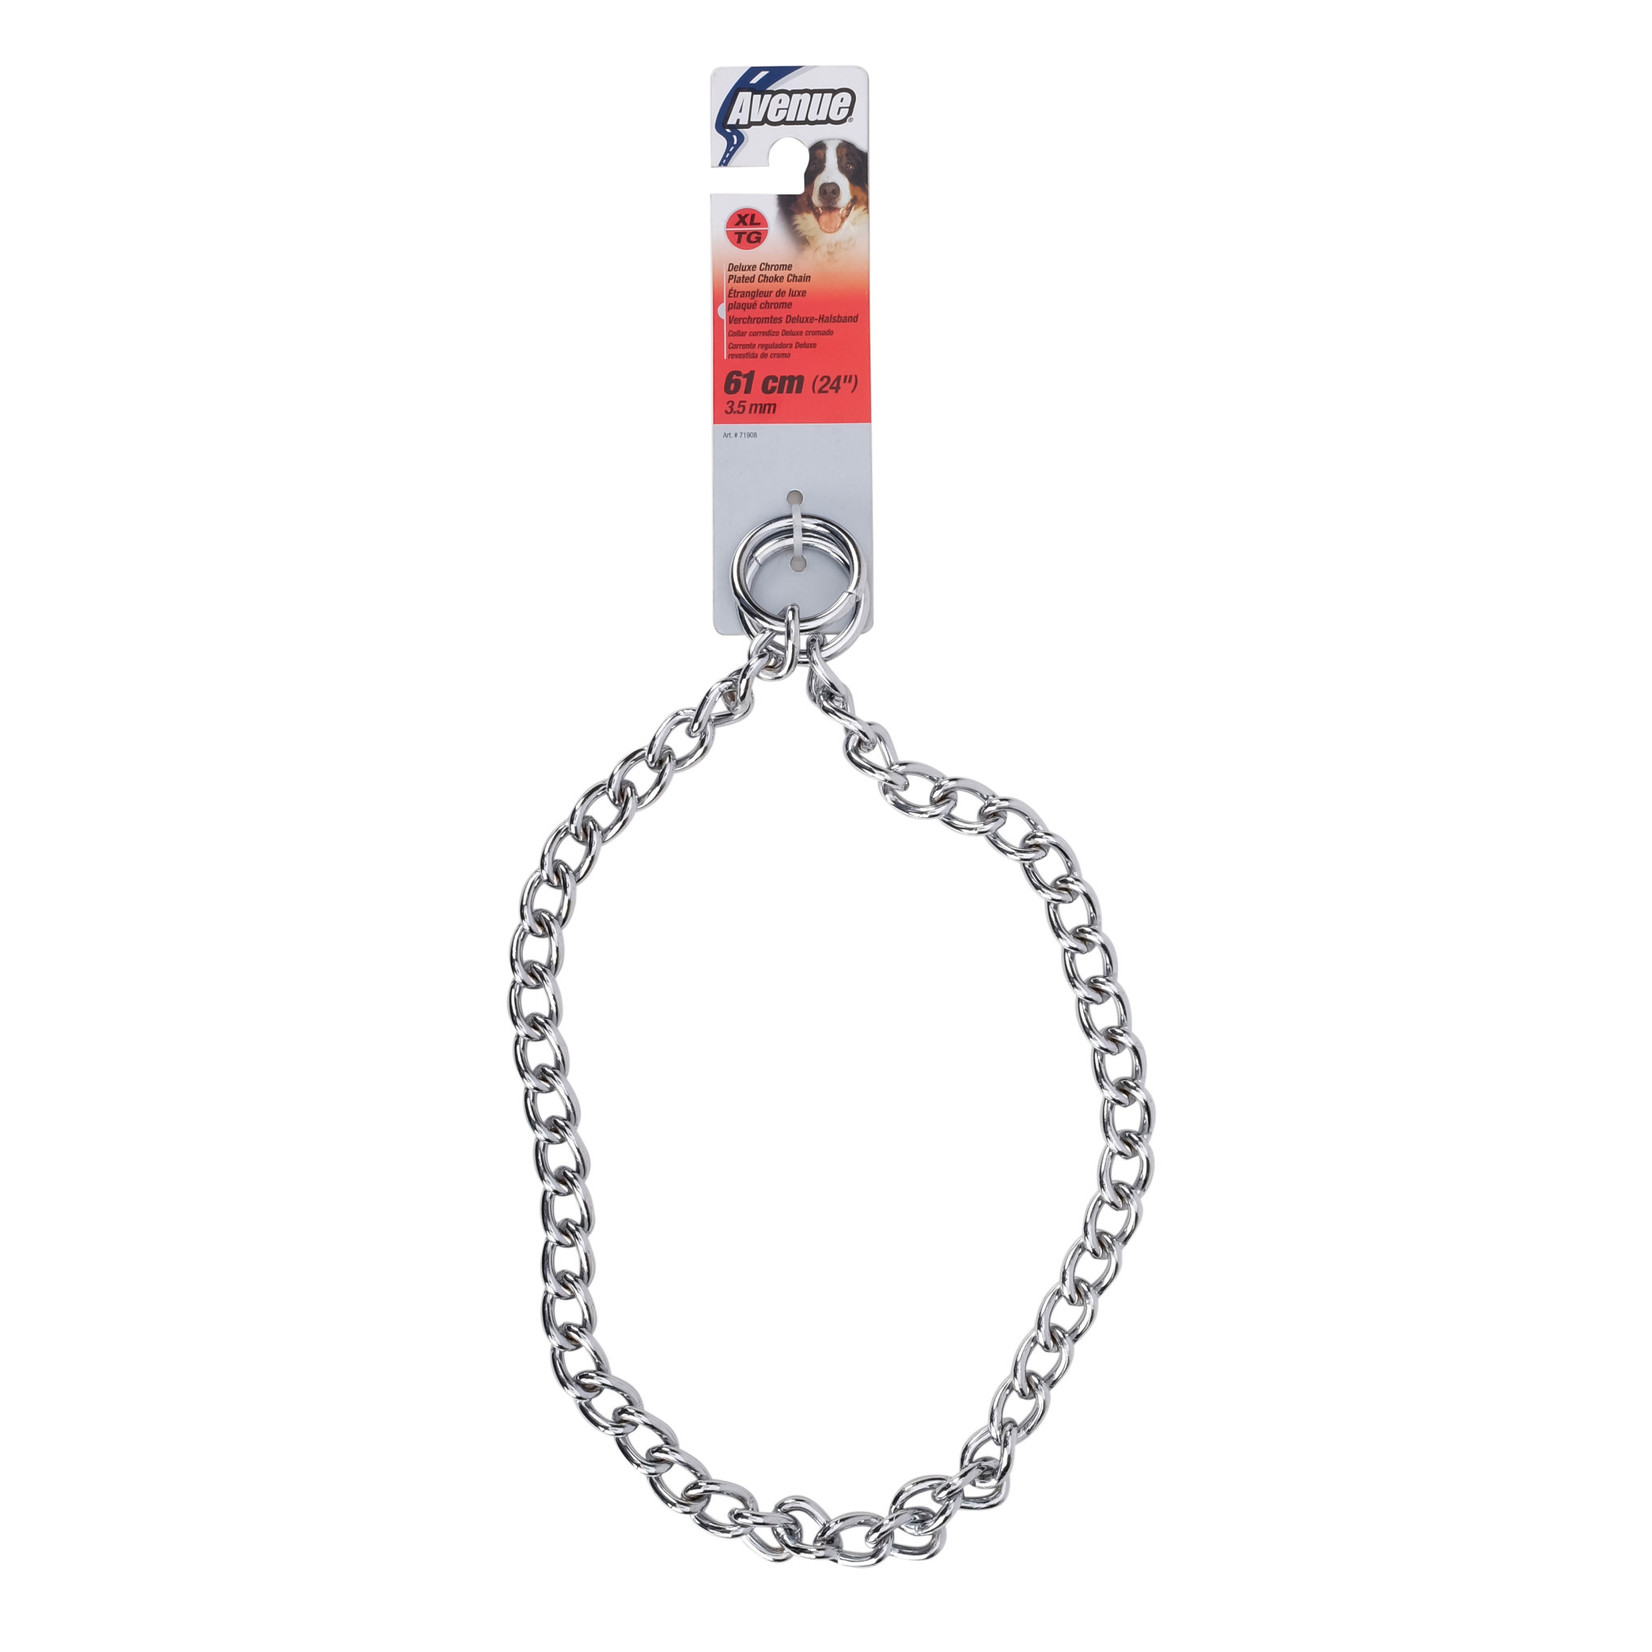 AVENUE Avenue Deluxe Chrome Plated Choke Chain Collar - XLarge - 61 cm (24in)